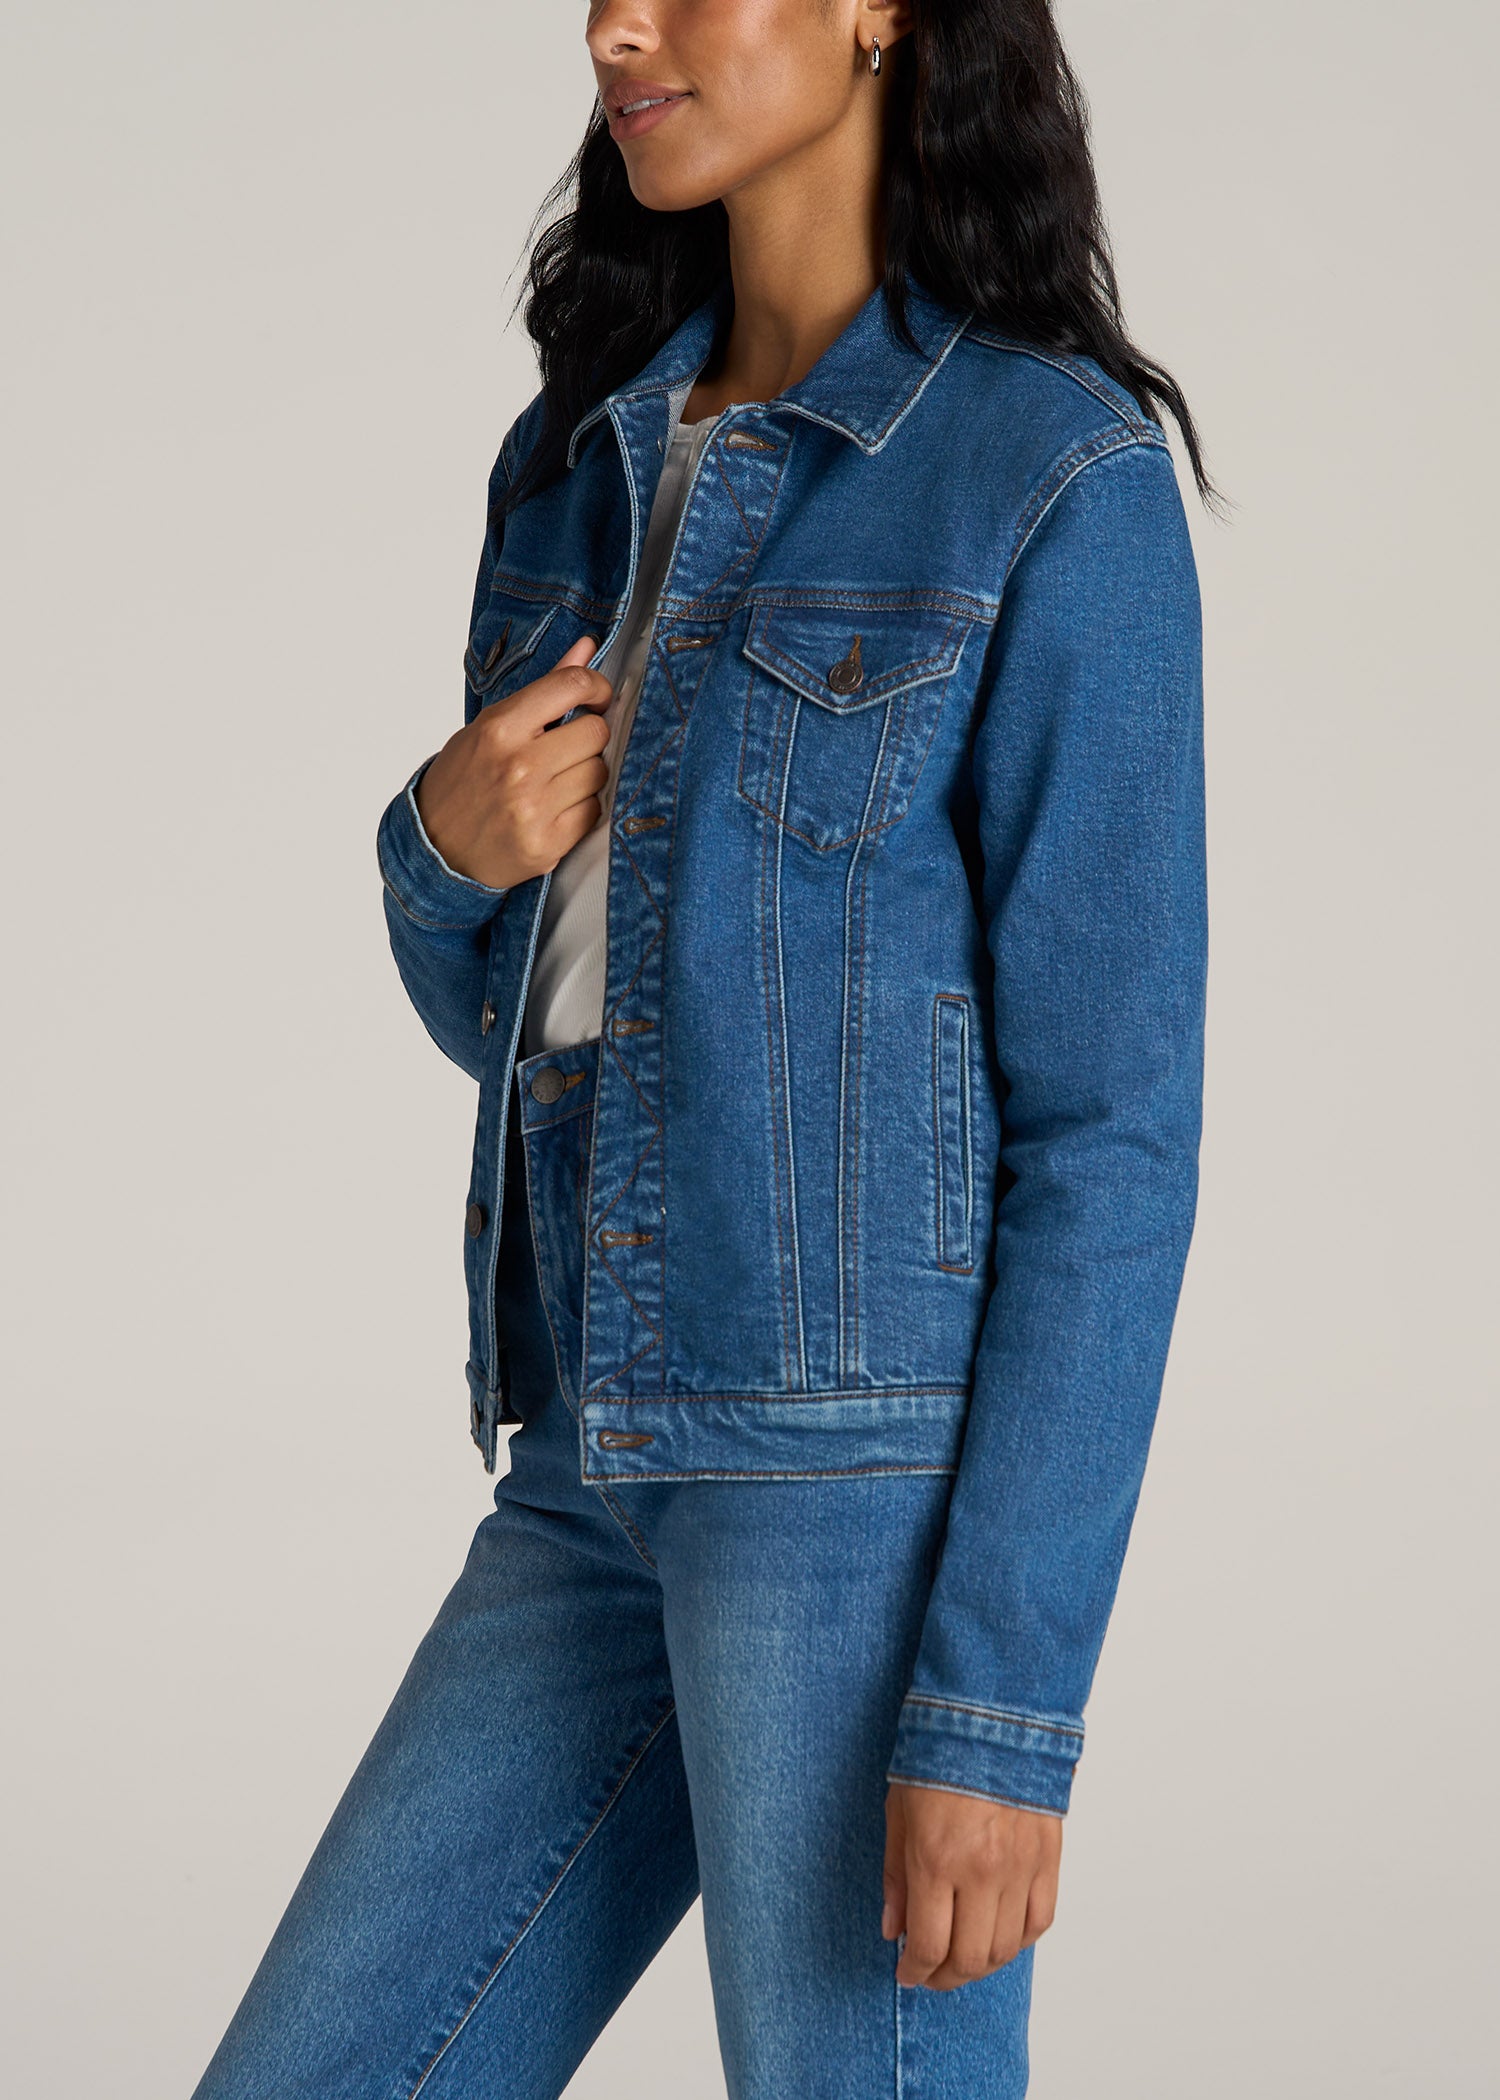 Denim Jacket For Girls at Rs.799/Piece in aurangabad offer by Agastika  Handpicked Collection